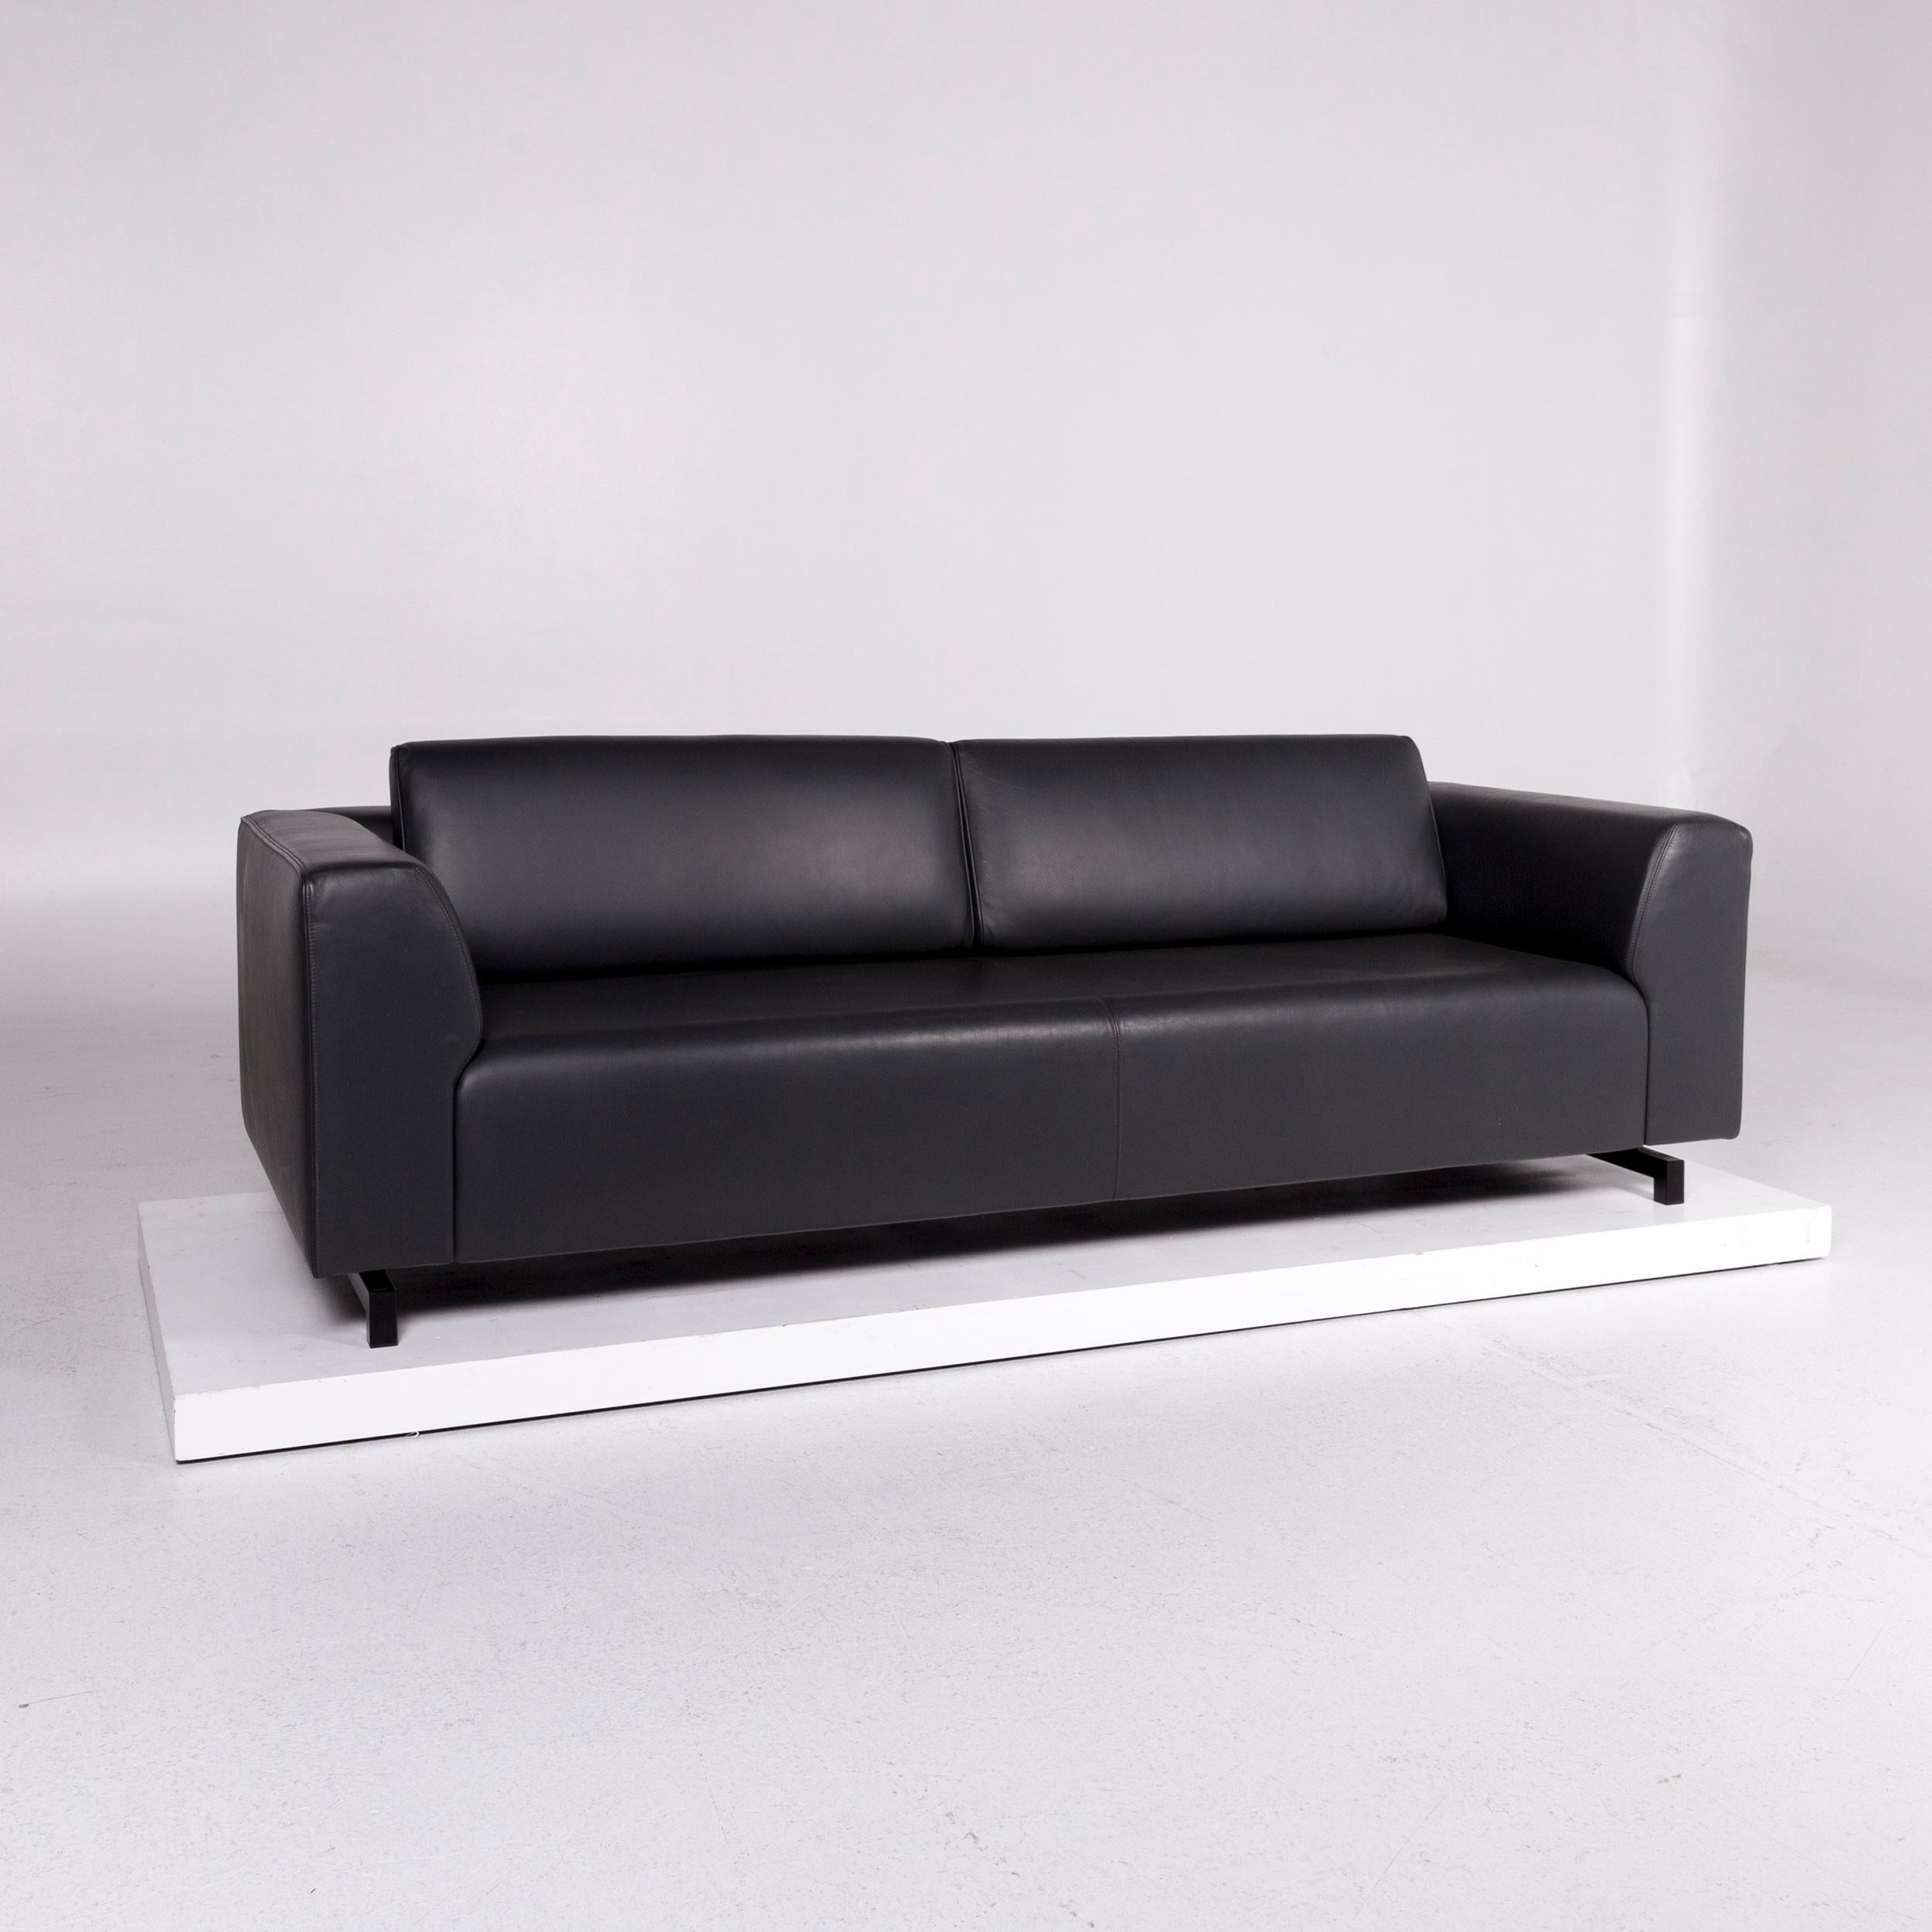 We bring to you a Wittmann square leather sofa gray dark gray three-seat couch.
 
 Product measurements in centimeters:
 
Depth 93
Width 221
Height 73
Seat-height 39
Rest-height 62
Seat-depth 51
Seat-width 176
Back-height 33.
  